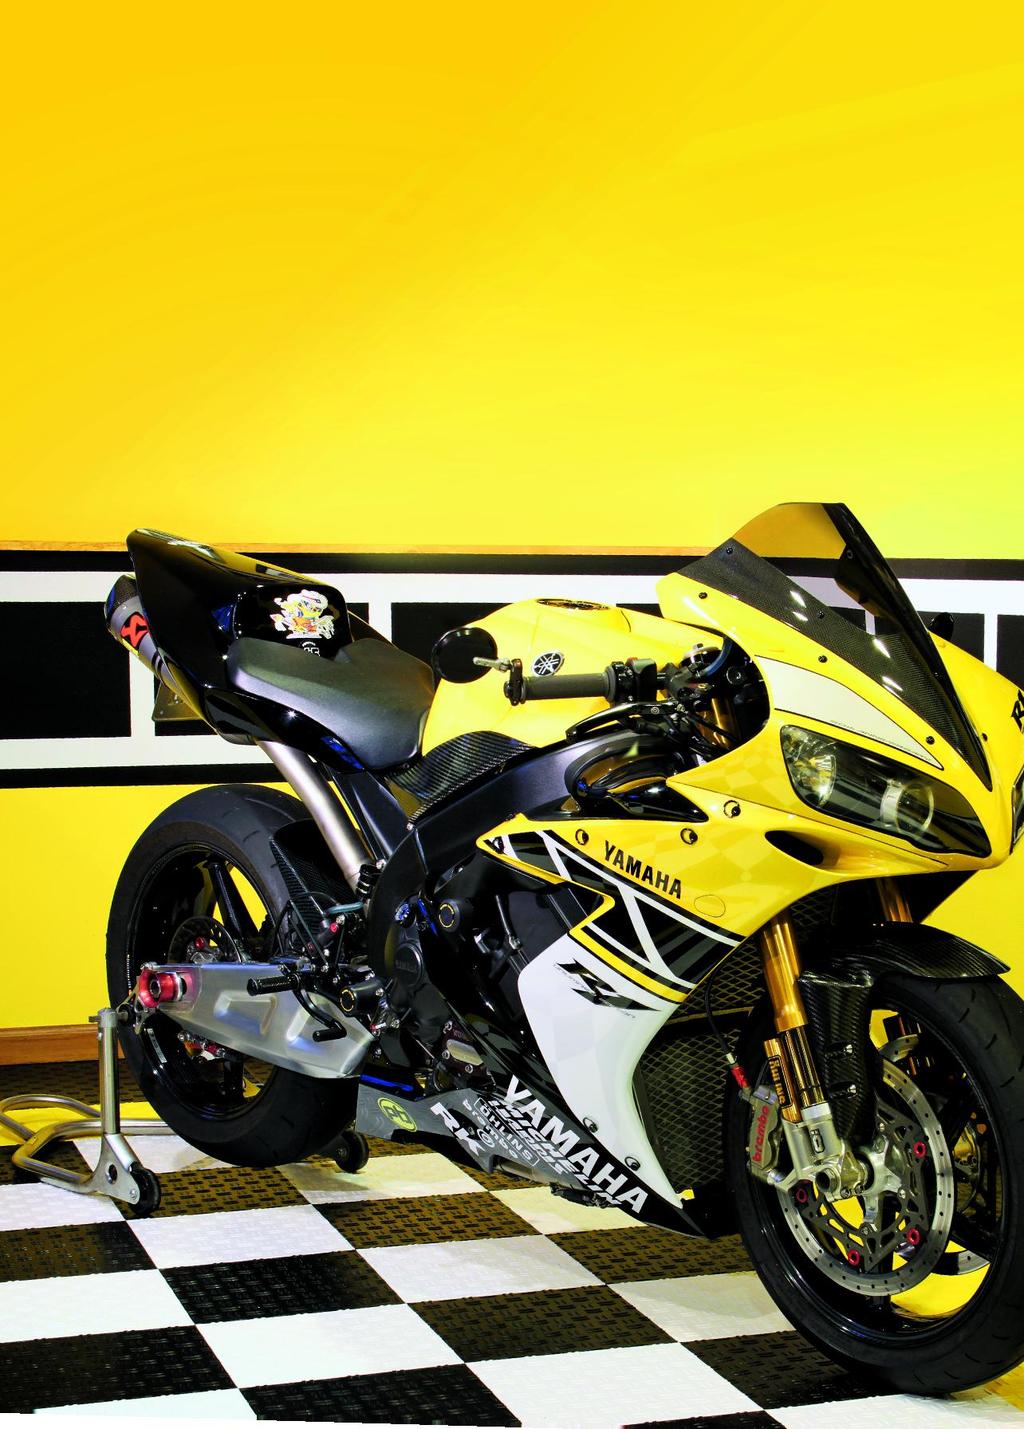 SPECIAL / 2006 ANNIVERSARY YZF-R1 IT S TAKEN 10 YEA